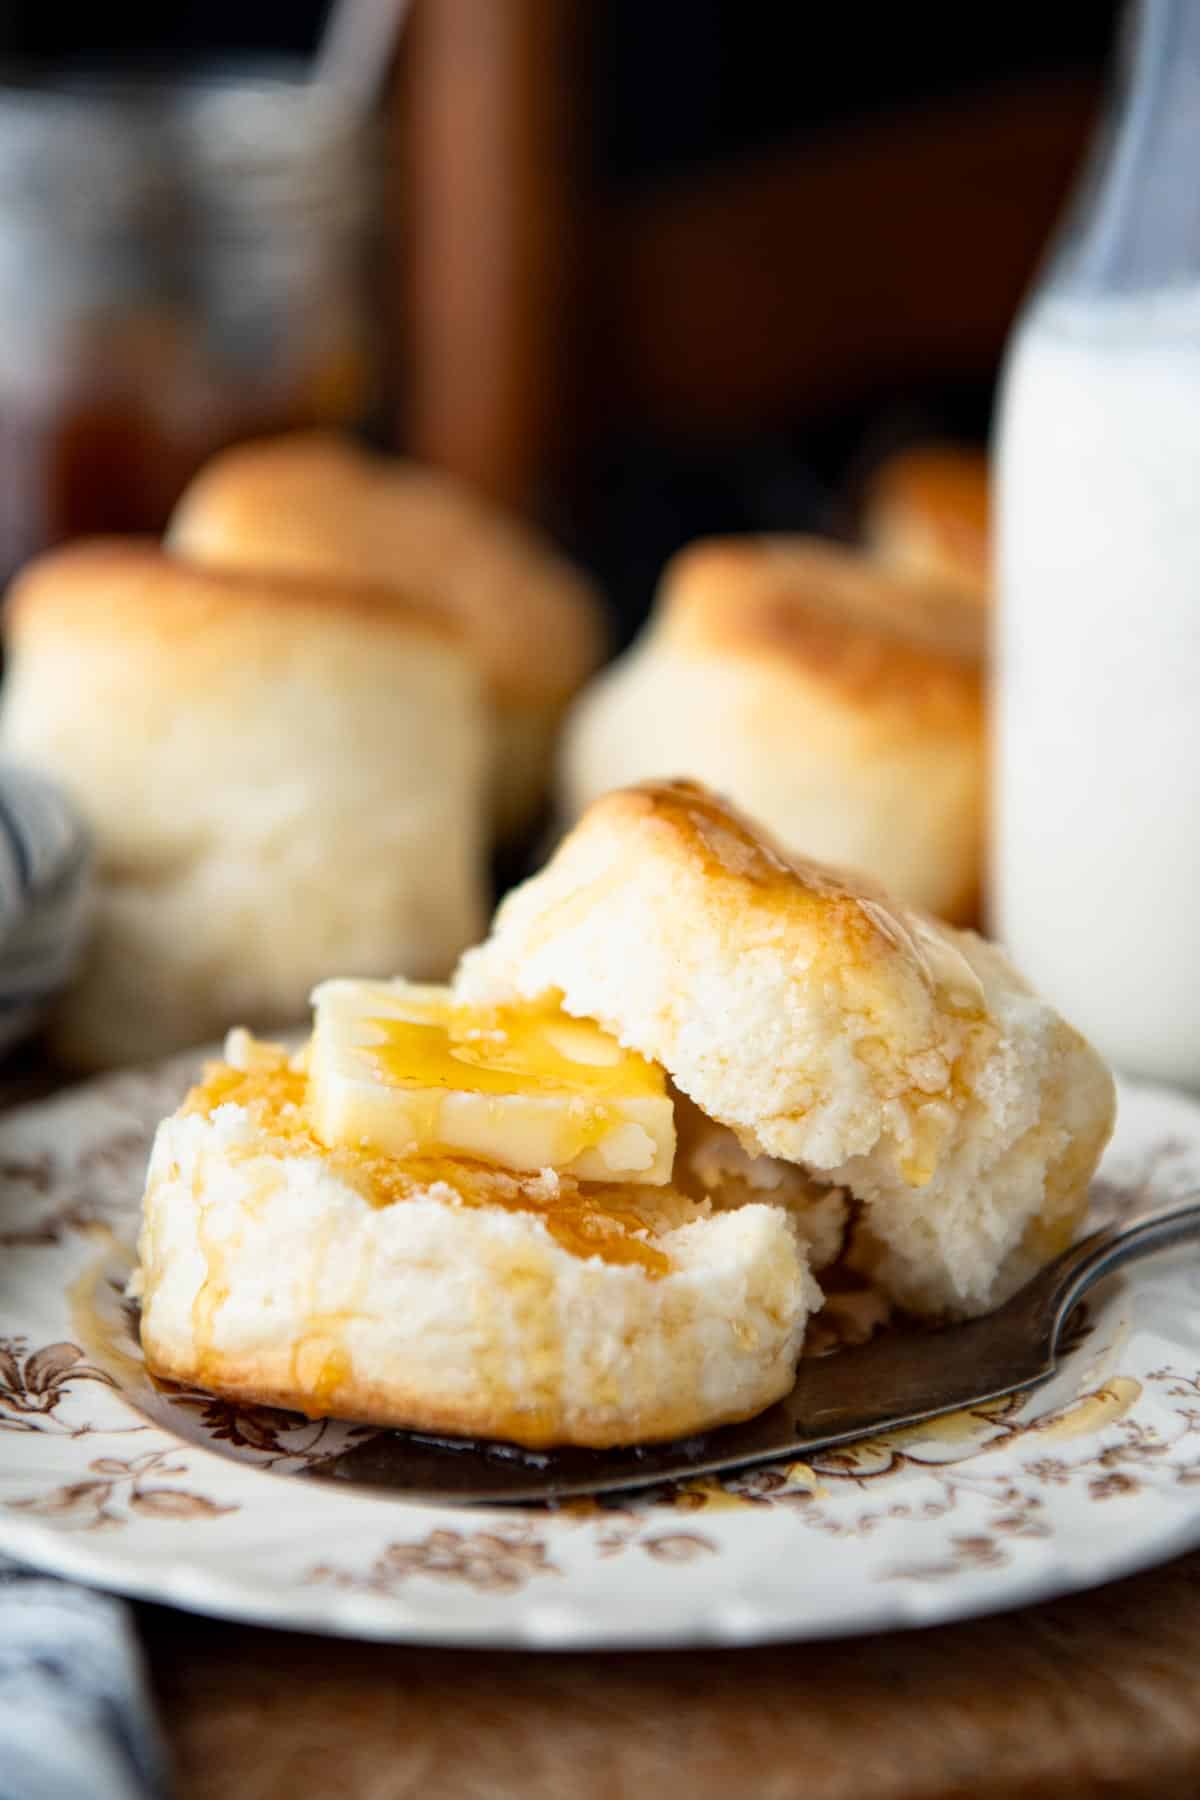 A heavy cream biscuit split in half on a plate and served with butter and honey.